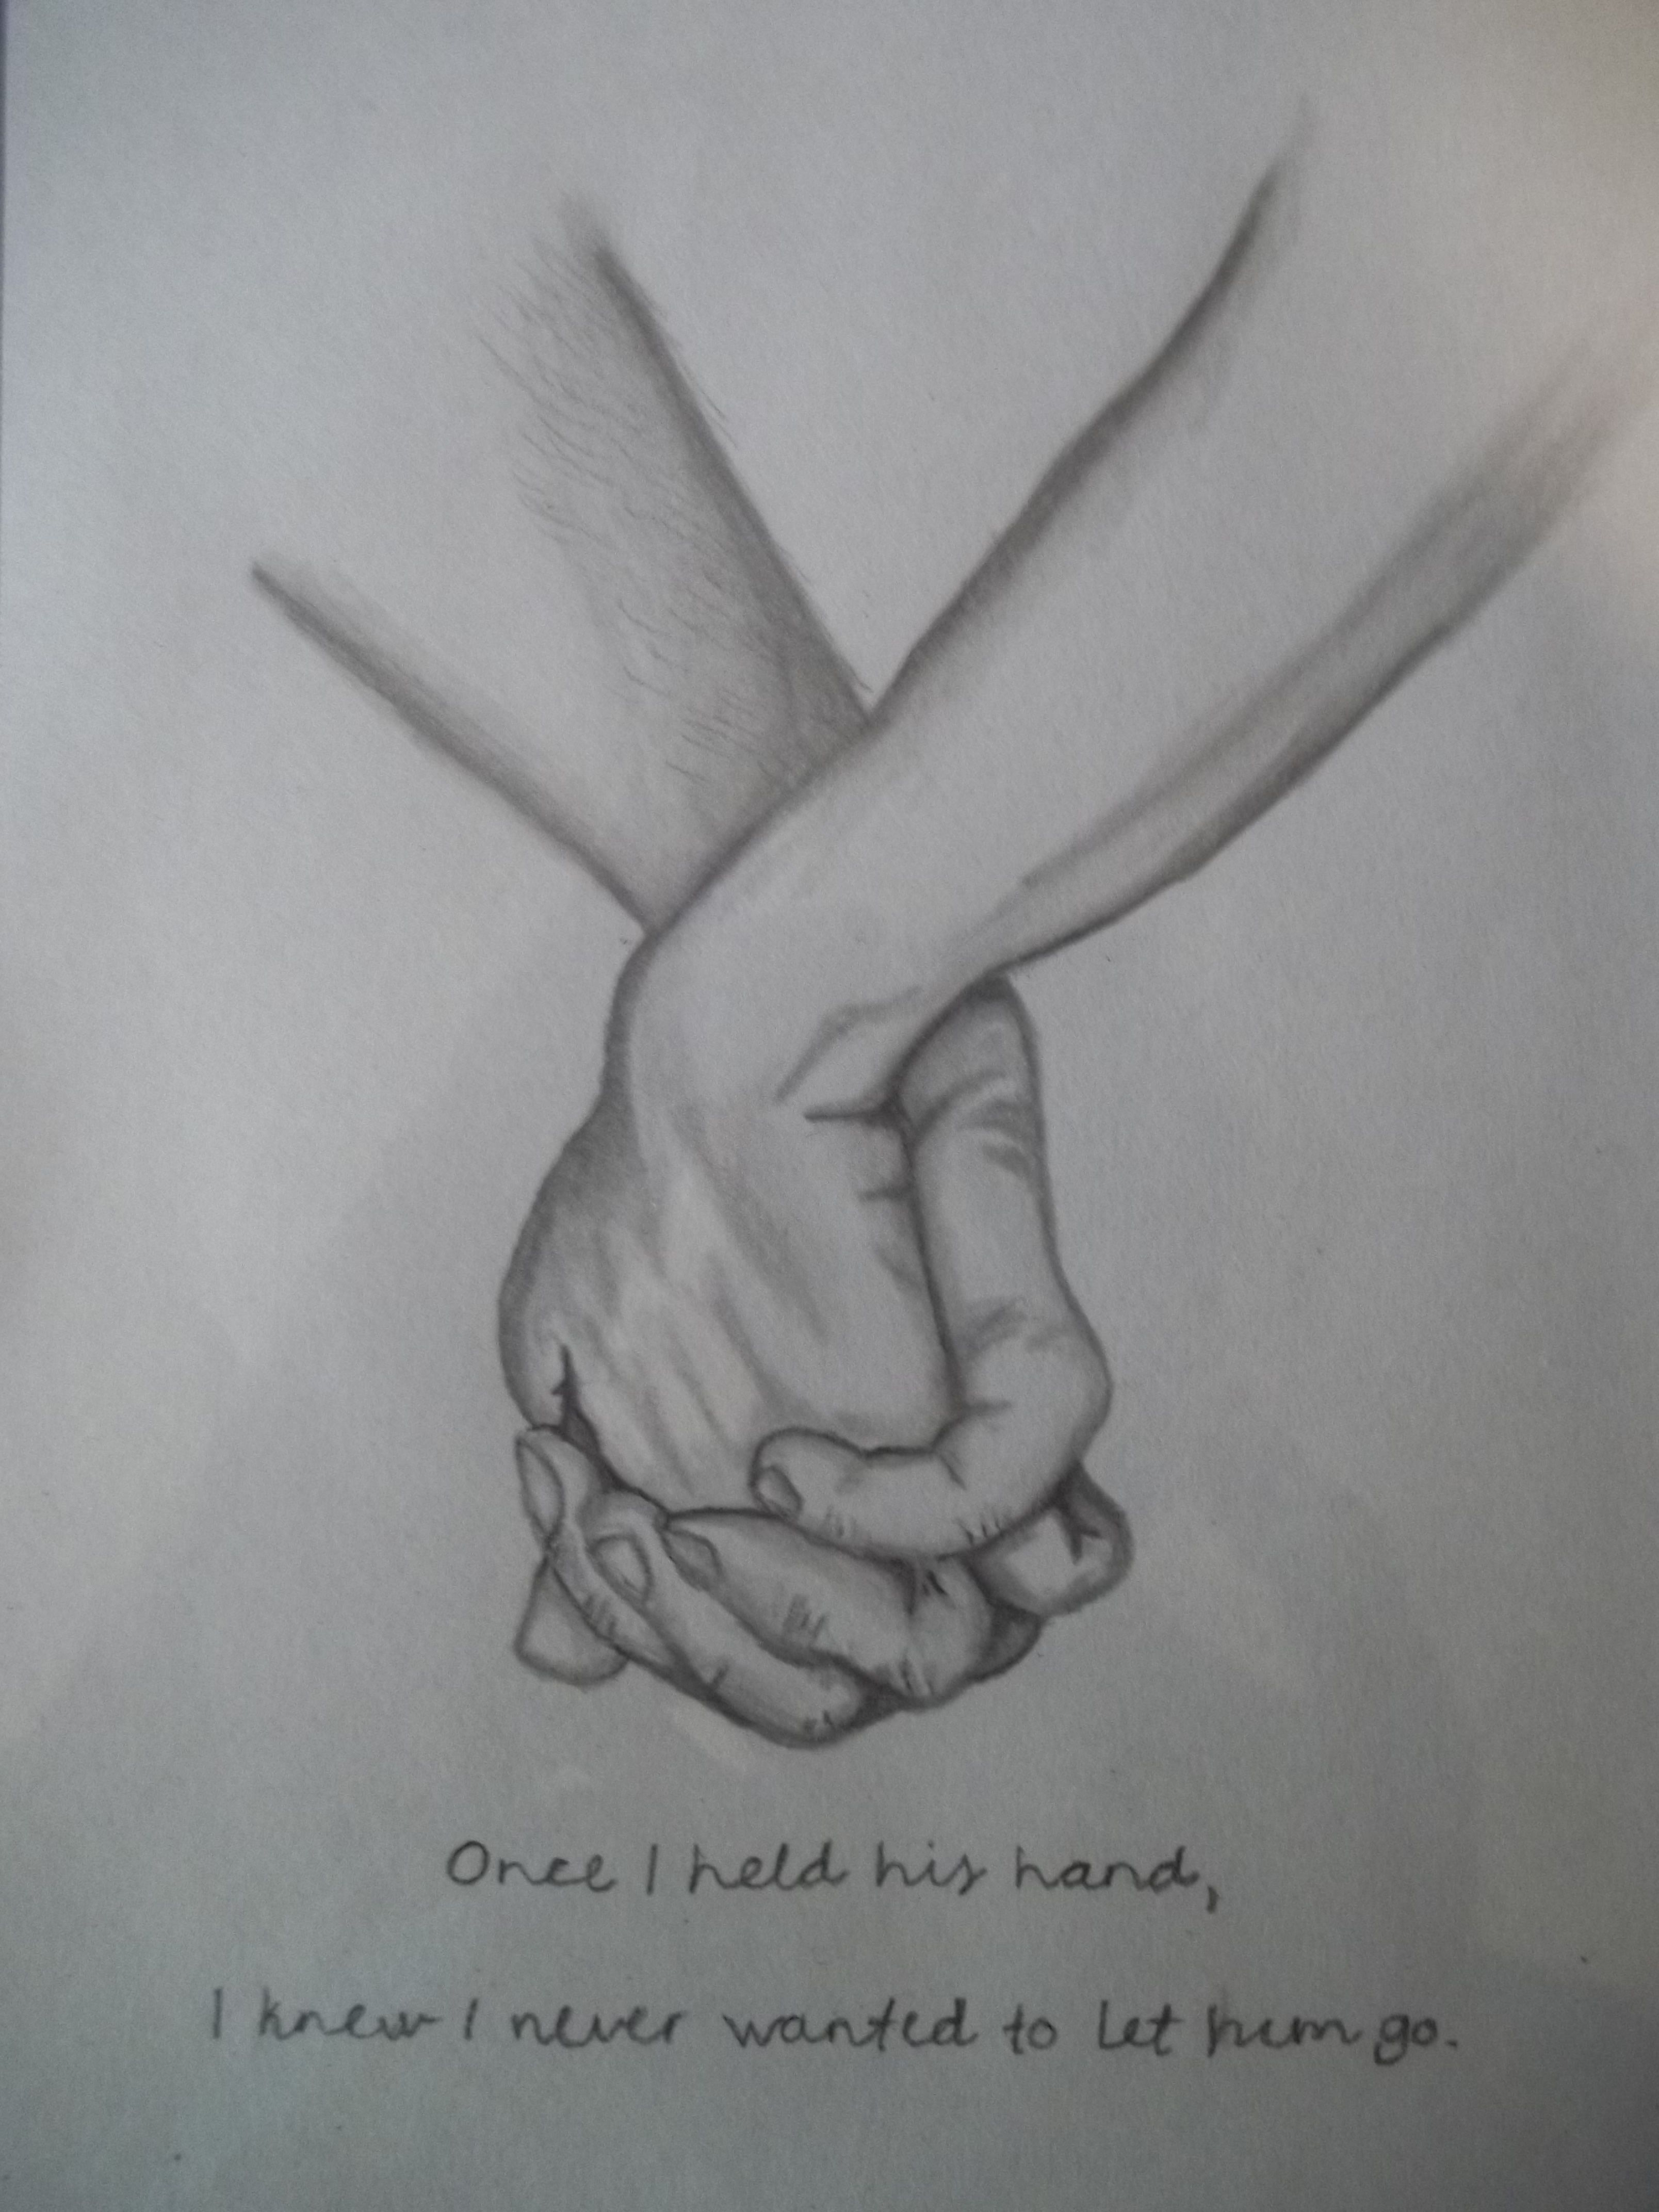 3216x4288 A Picture I Drew For My Boyfriend On Our One Year Anniversary - A...